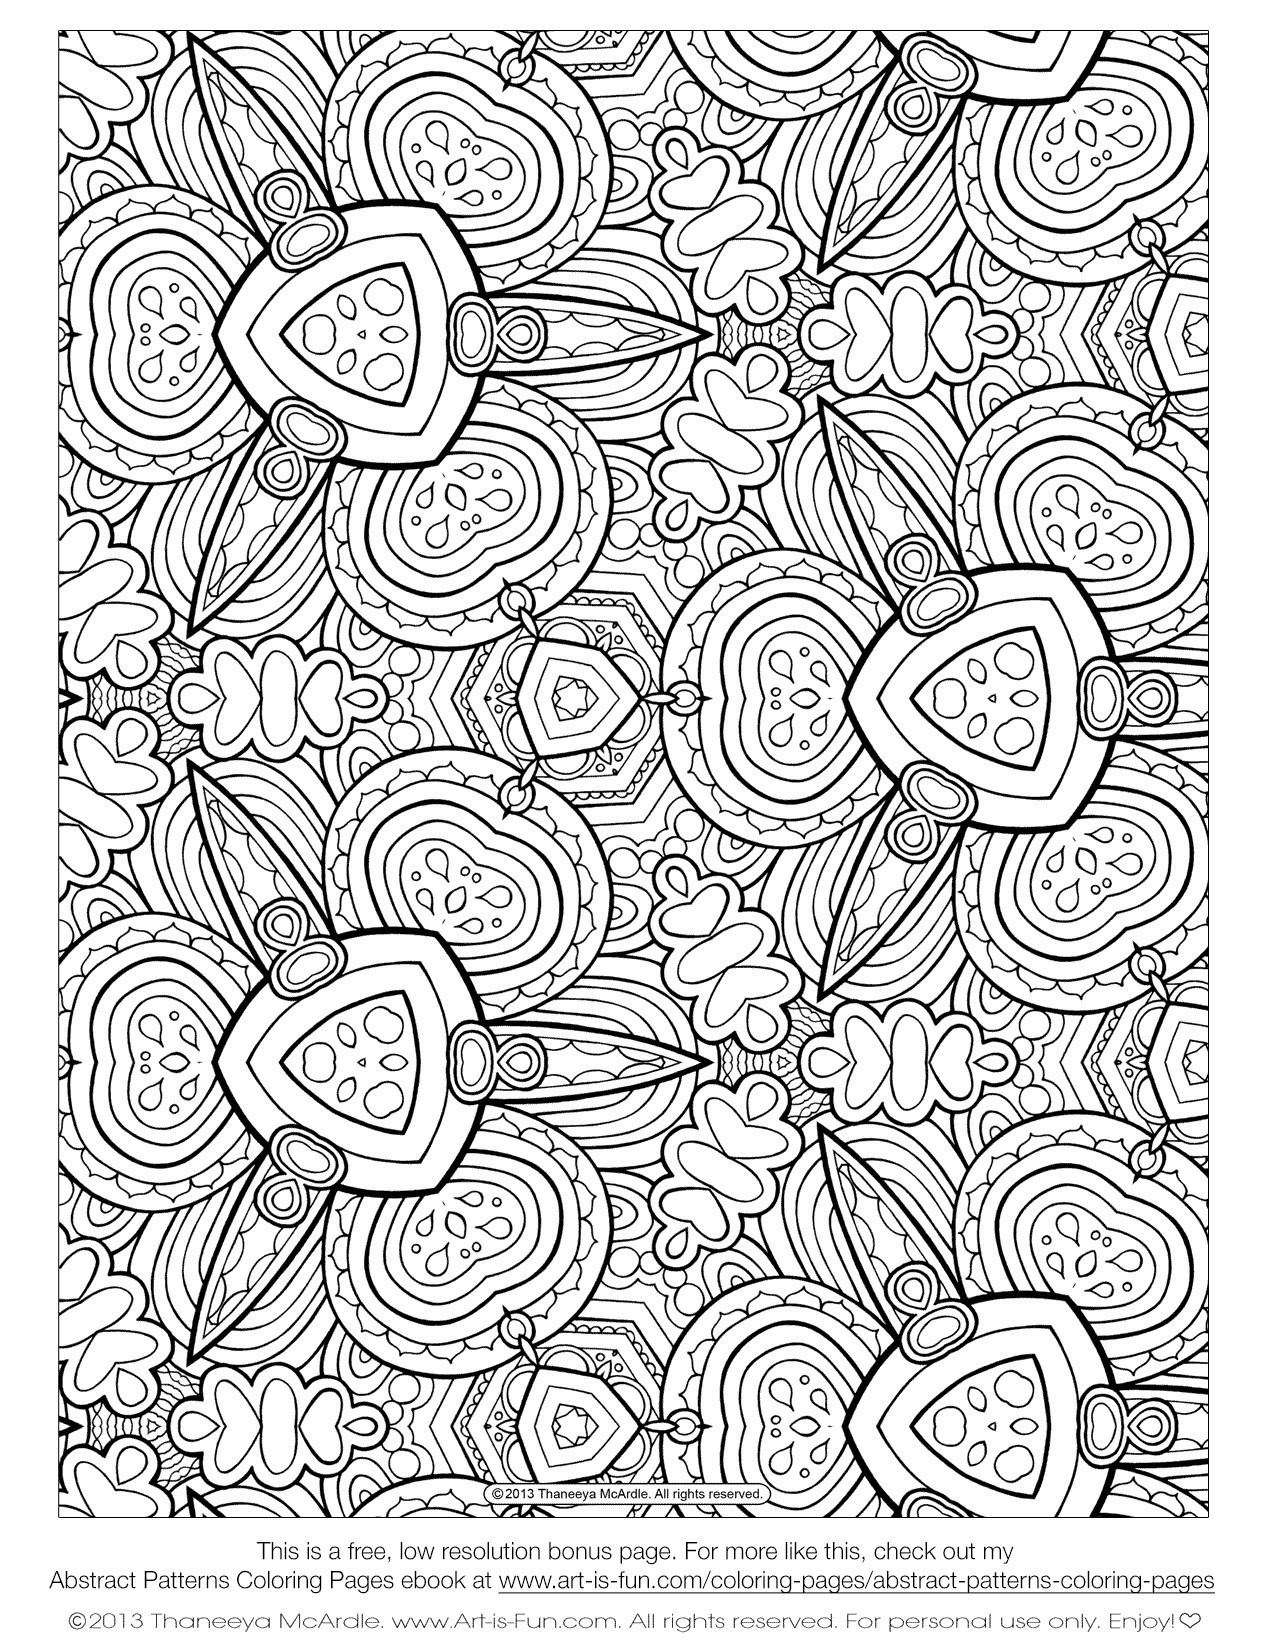 Coloring Pages : Free Printable Coloring Pages Adults Only Swear - Free Printable Coloring Pages For Adults Only